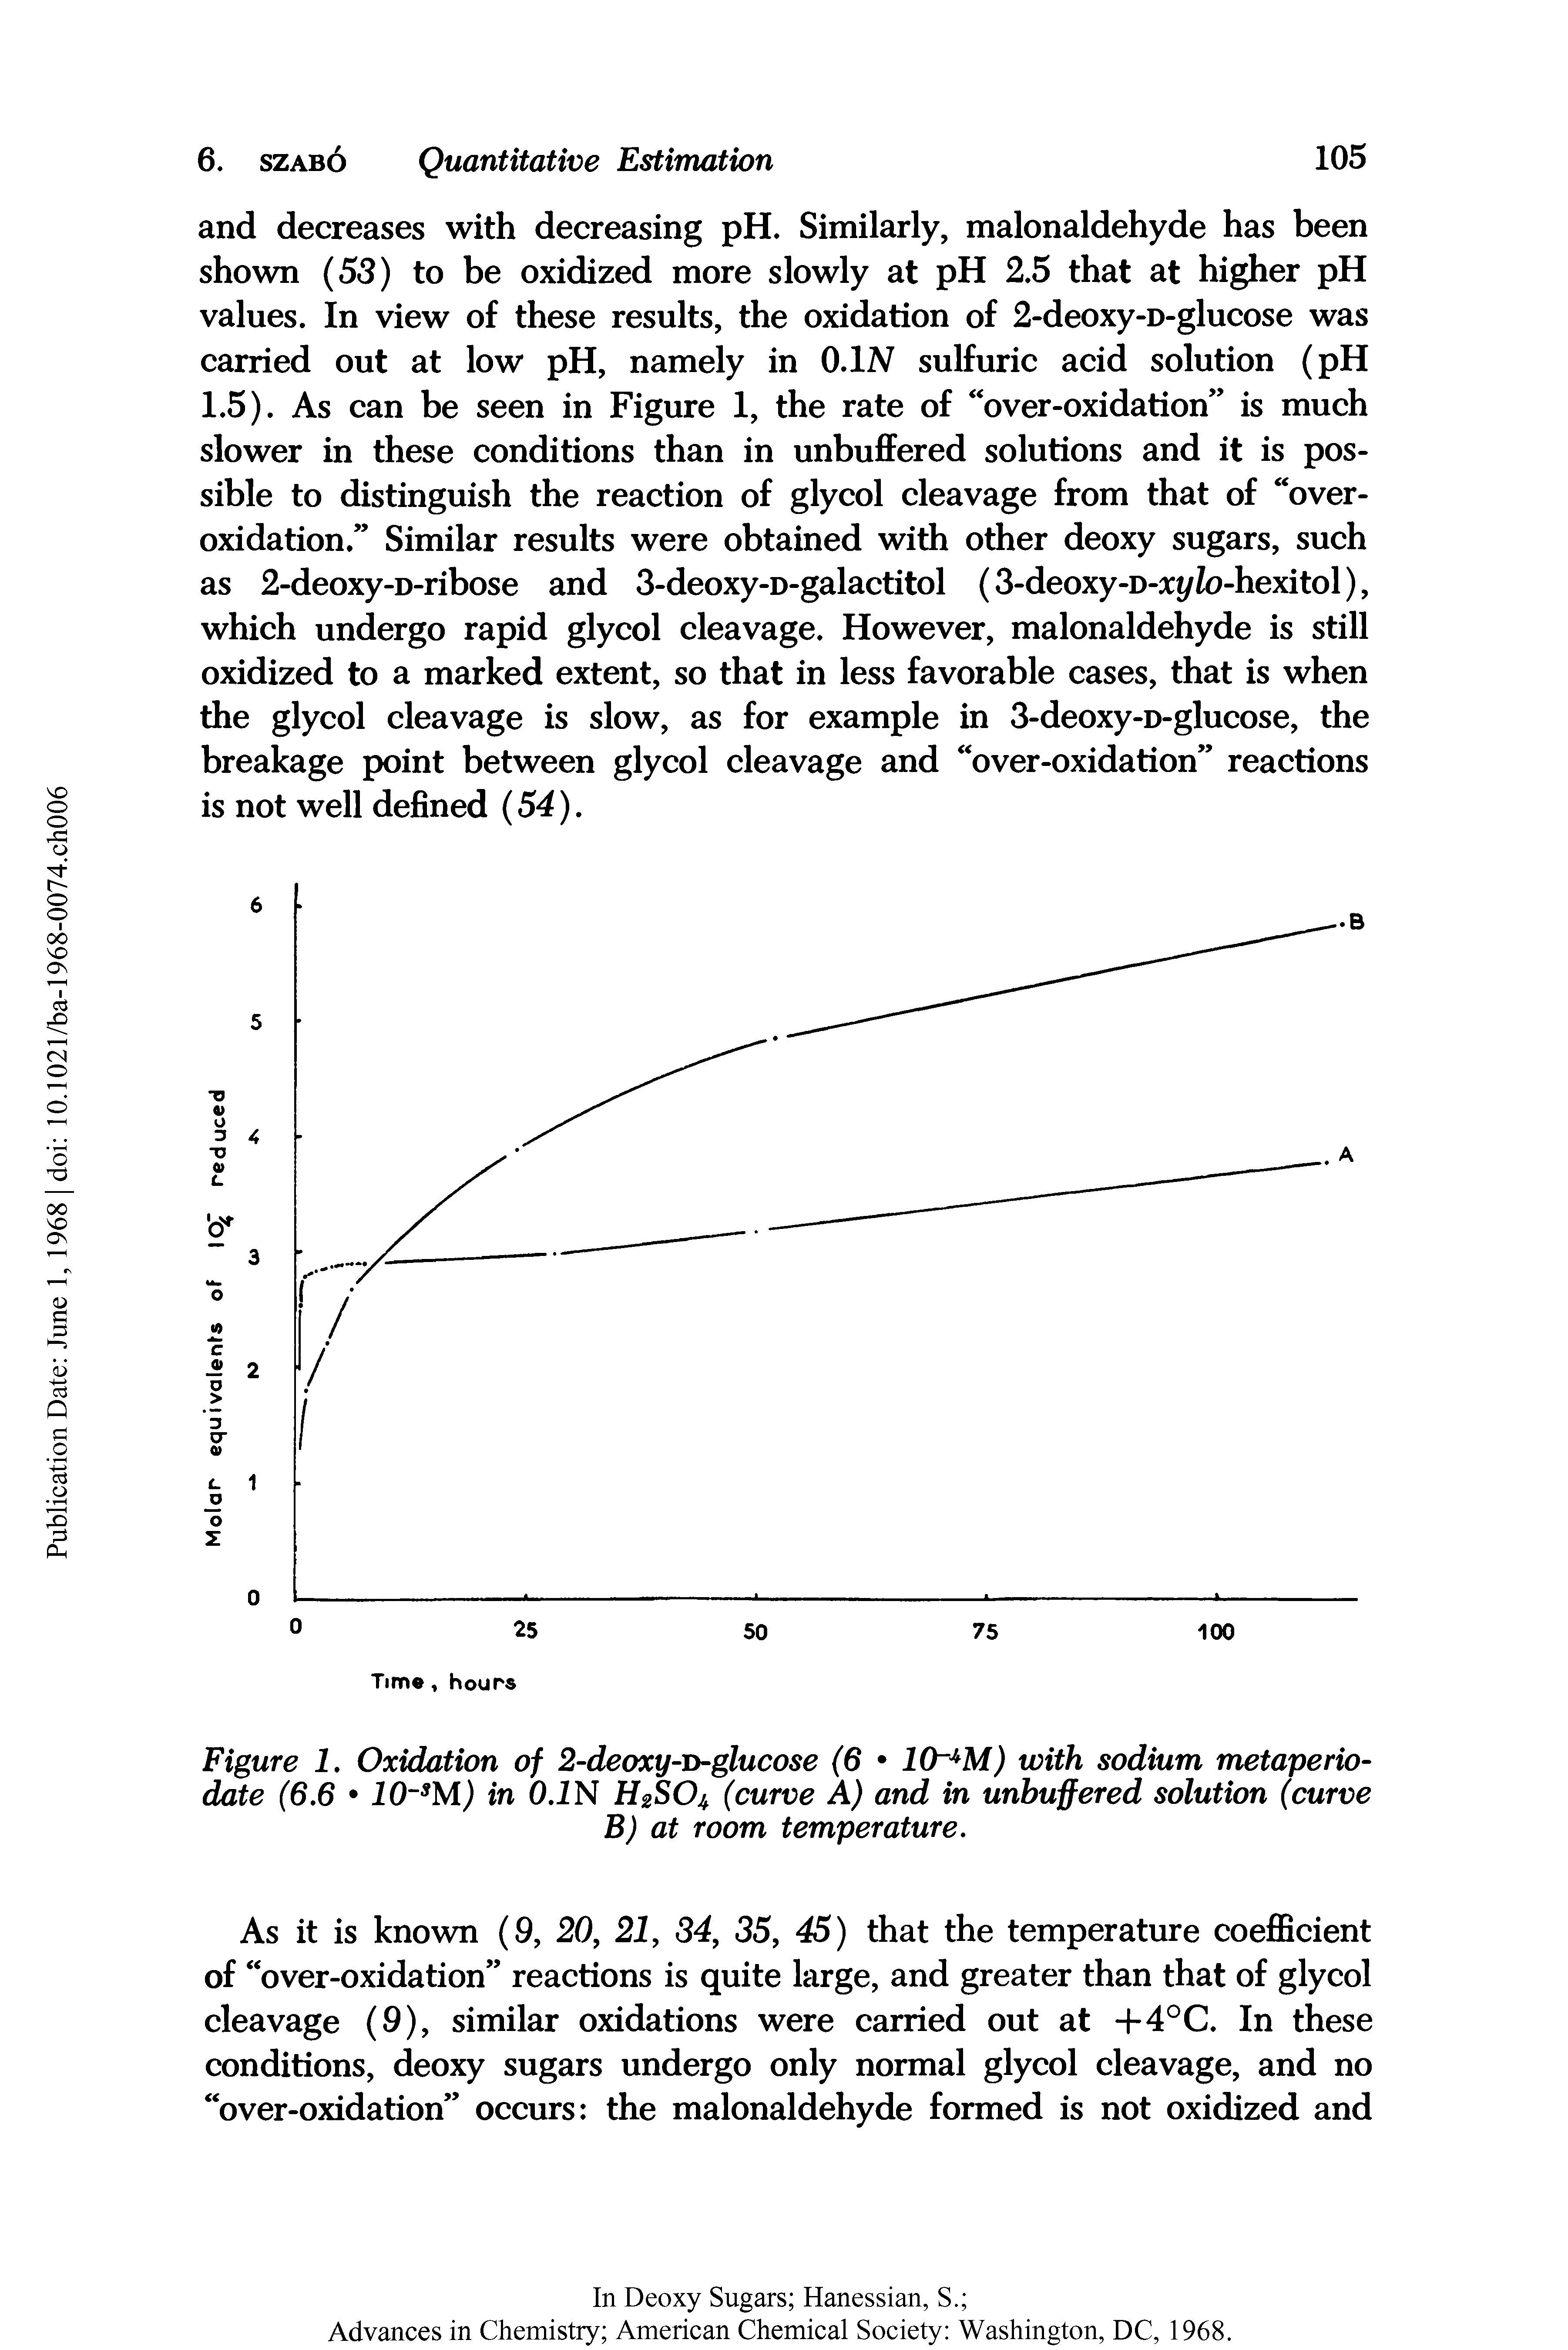 Figure 1. Oxidation of 2-deoxy-D-glucose (6 10 4M) with sodium metaperiodate (6.6 10 SM) in 0.1N H2SO4 (curve A) and in unbuffered solution (curve...